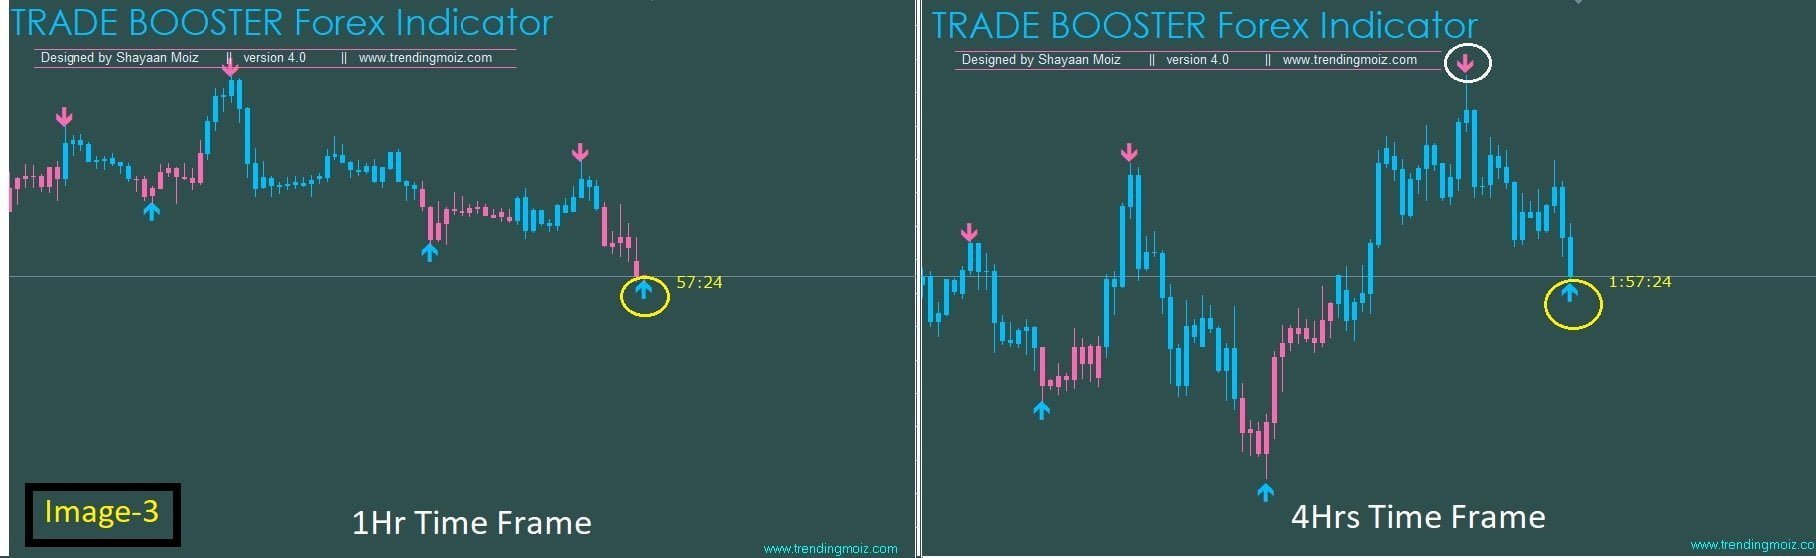 Trade Booster Forex Indicator: Powerful and accurate tool for FOREX trading. Combines advanced analysis for precise entries and exits. Boost your trades now!